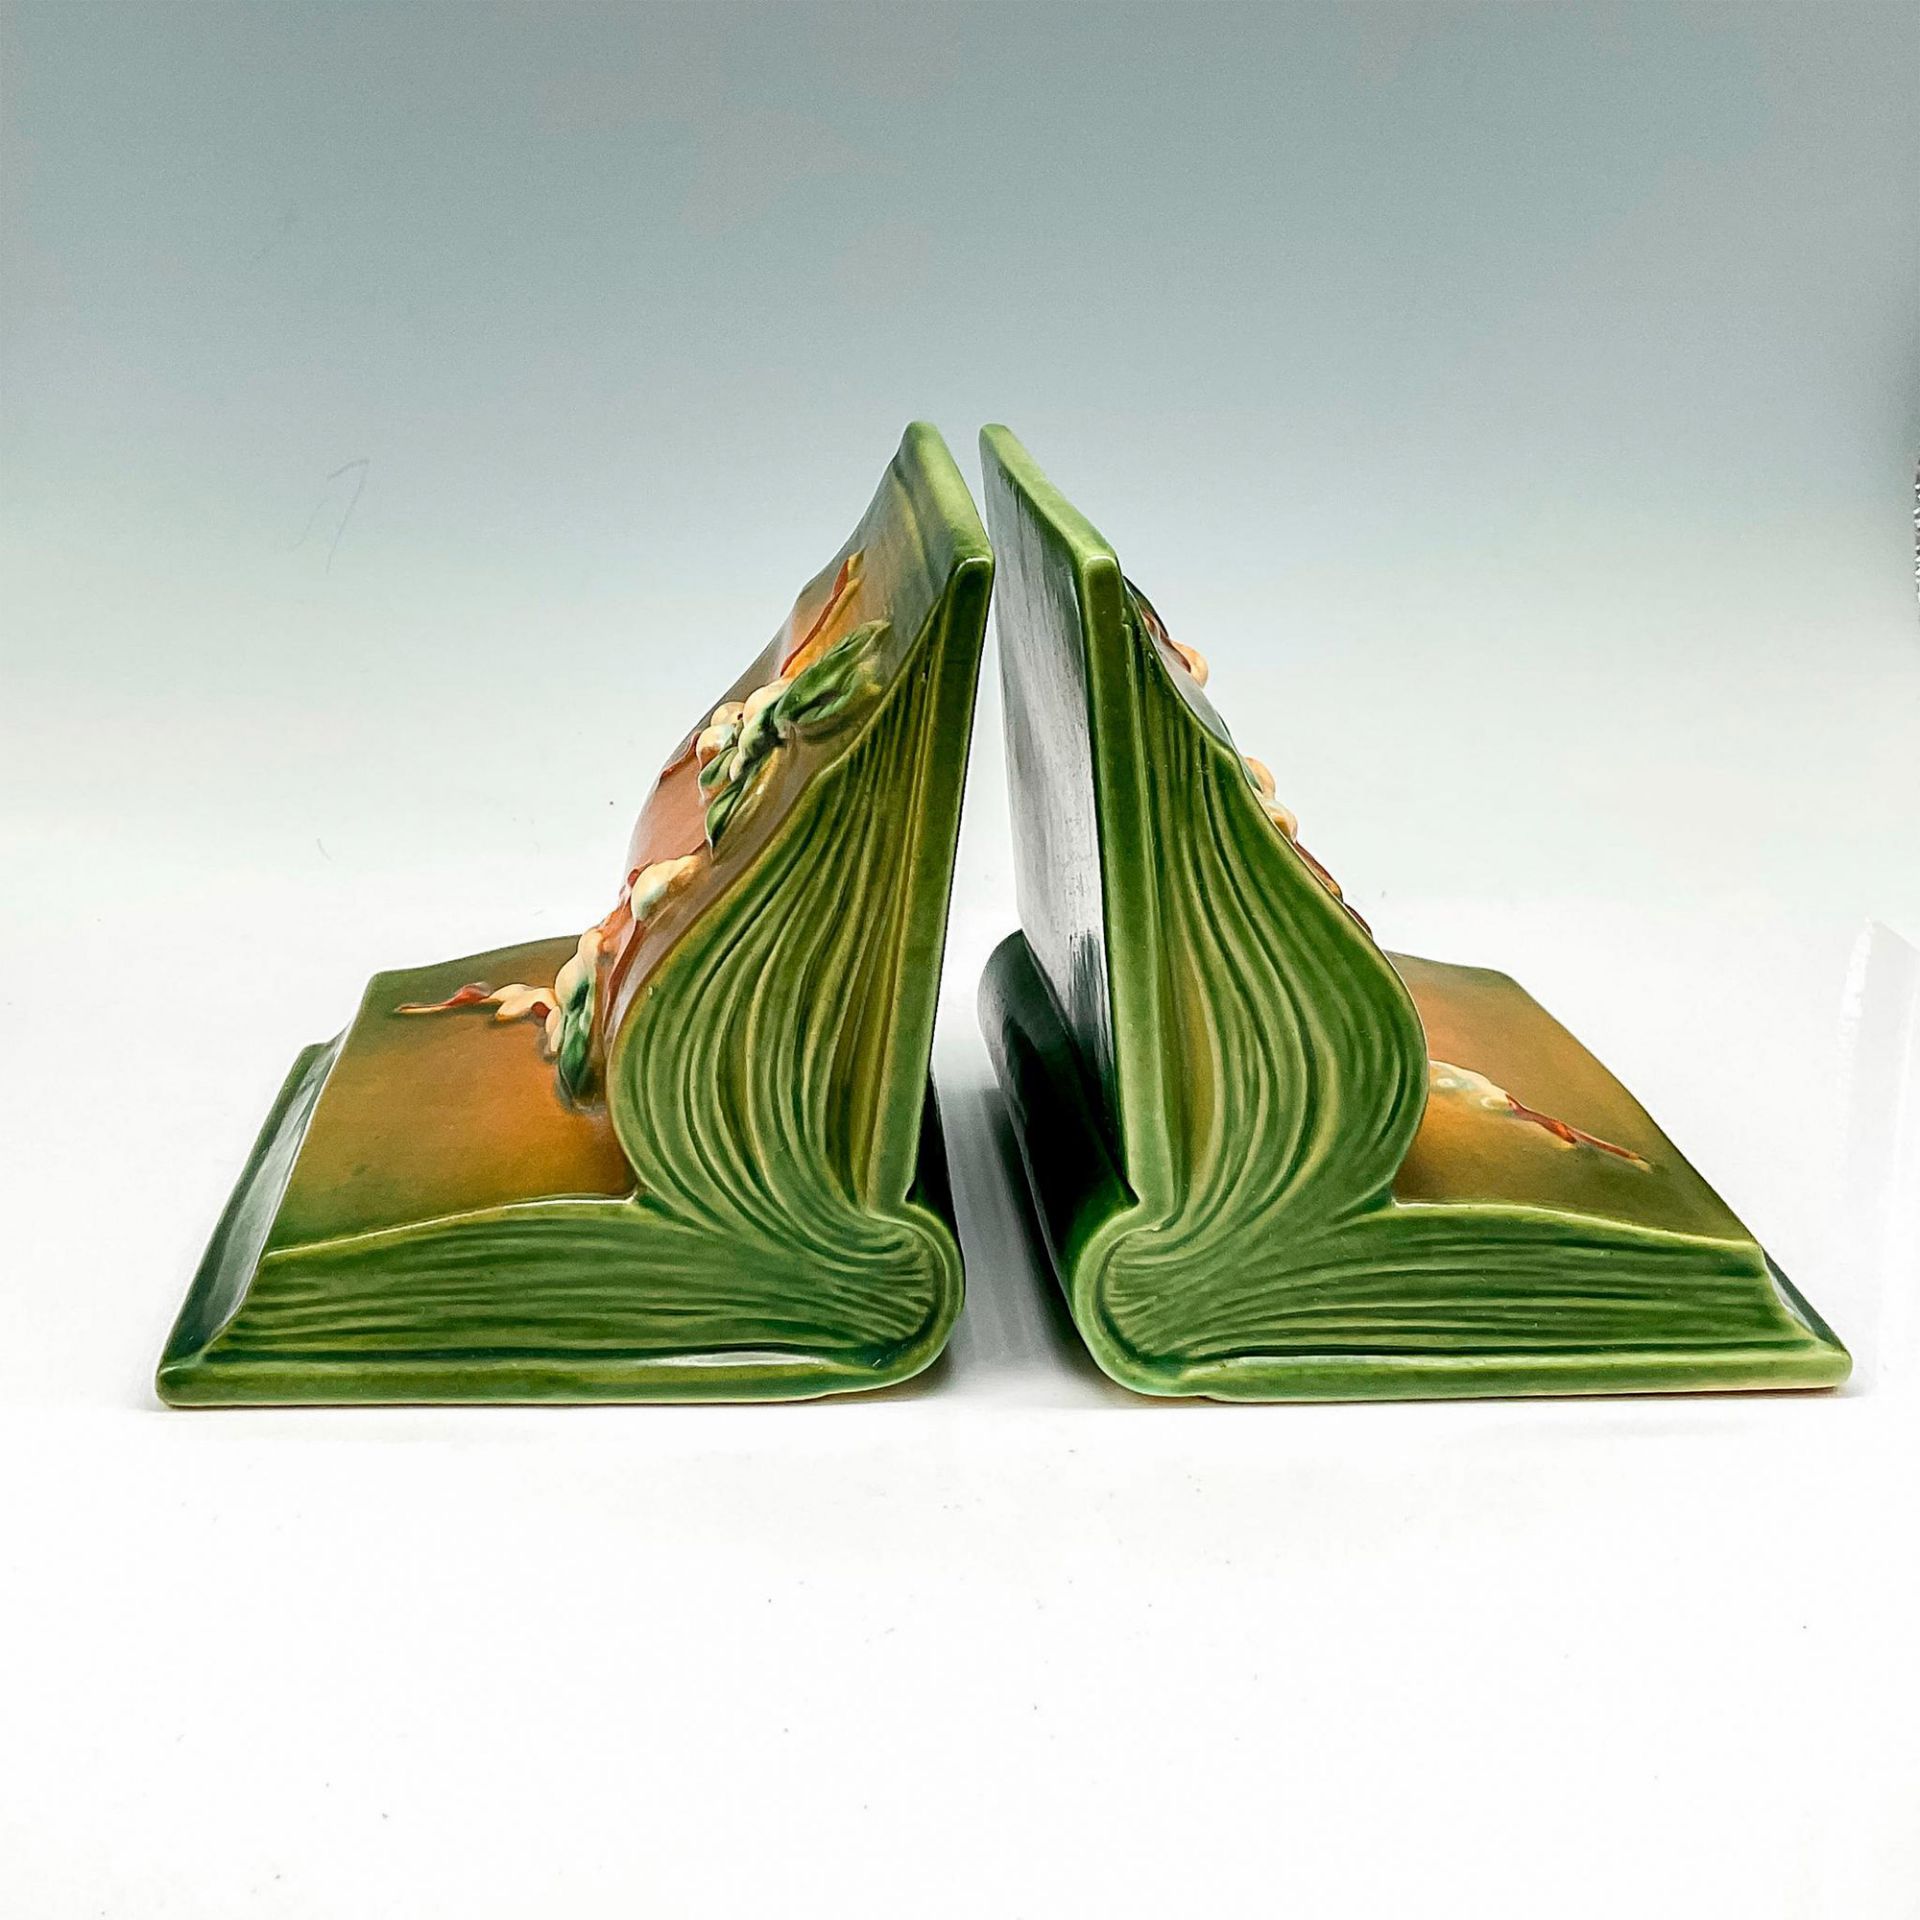 Roseville Pottery Pair of Bookends, Snowberry Green